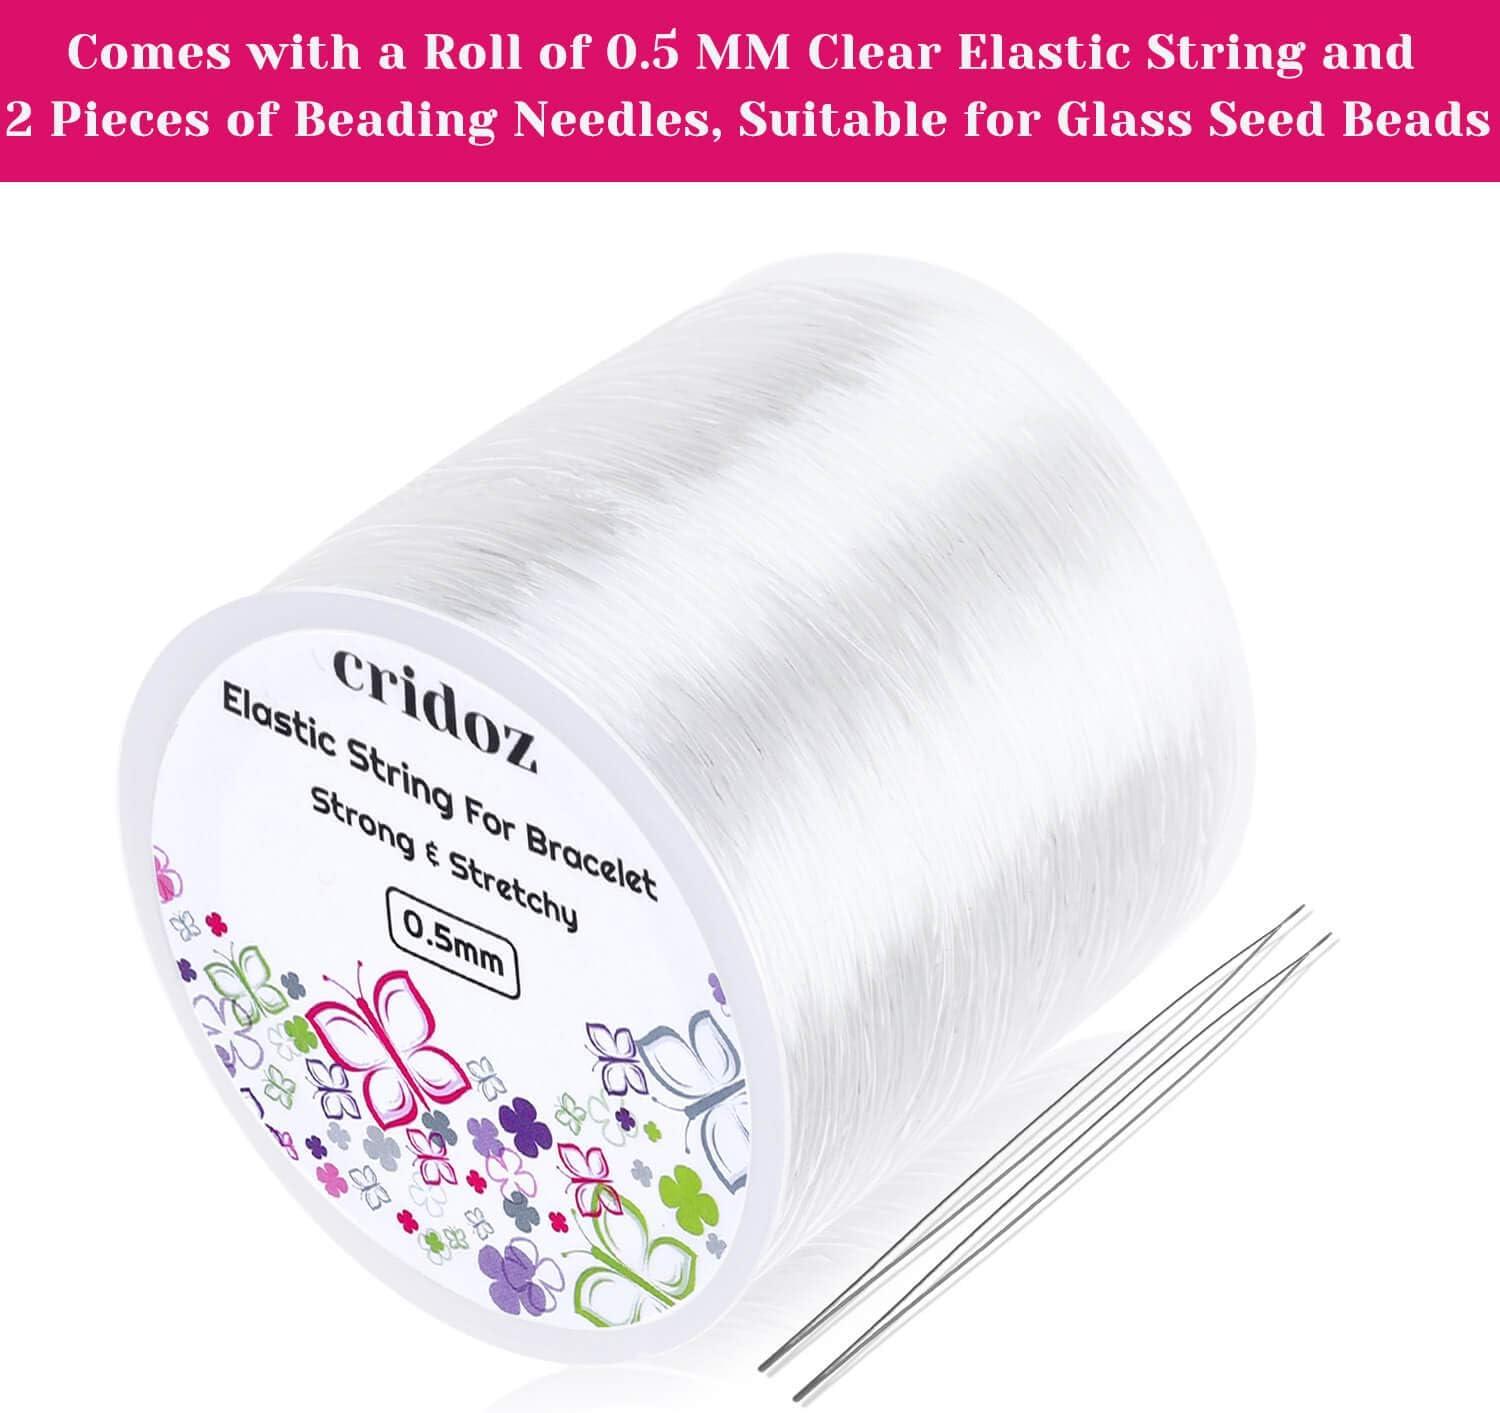 1mm Elastic Stretch String, 4 Rolls Clear Beading String with 2 Sizes Beading Needles, Yarn Scissors, Needle Bottle, Crystal String Bead Cord for